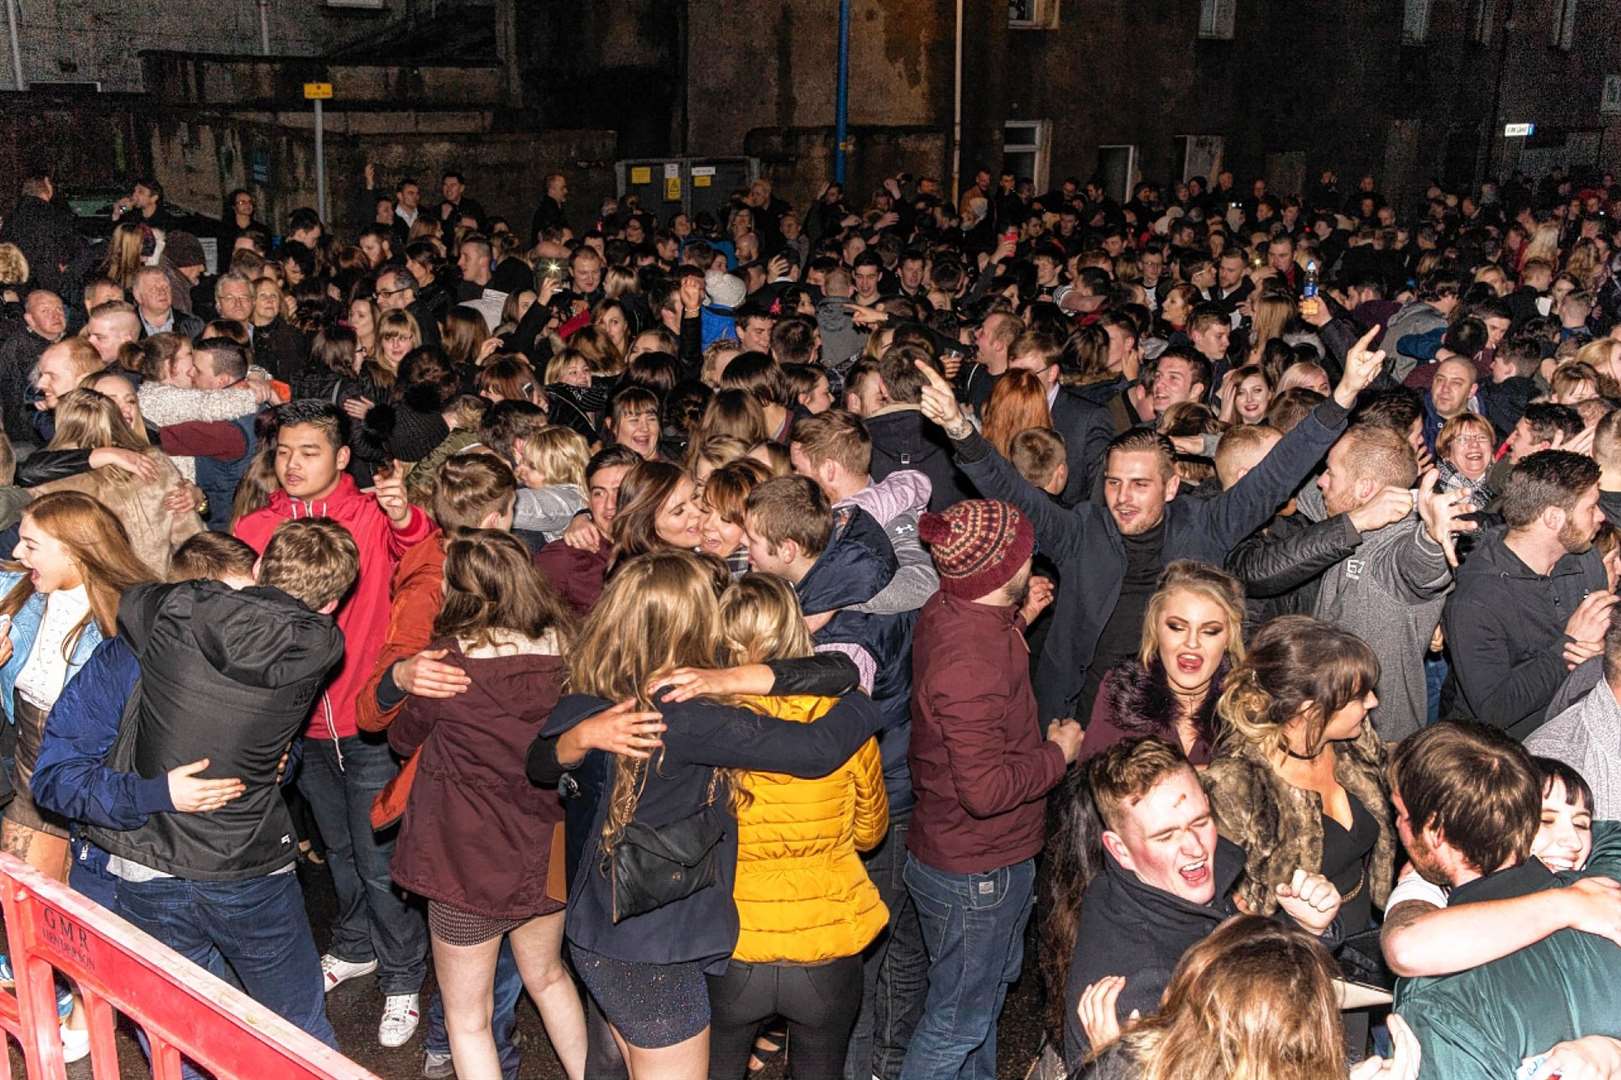 Party-goers celebrate the arrival of 2017 in Wick town centre. Picture: Robert Macdonald / Northern Studios